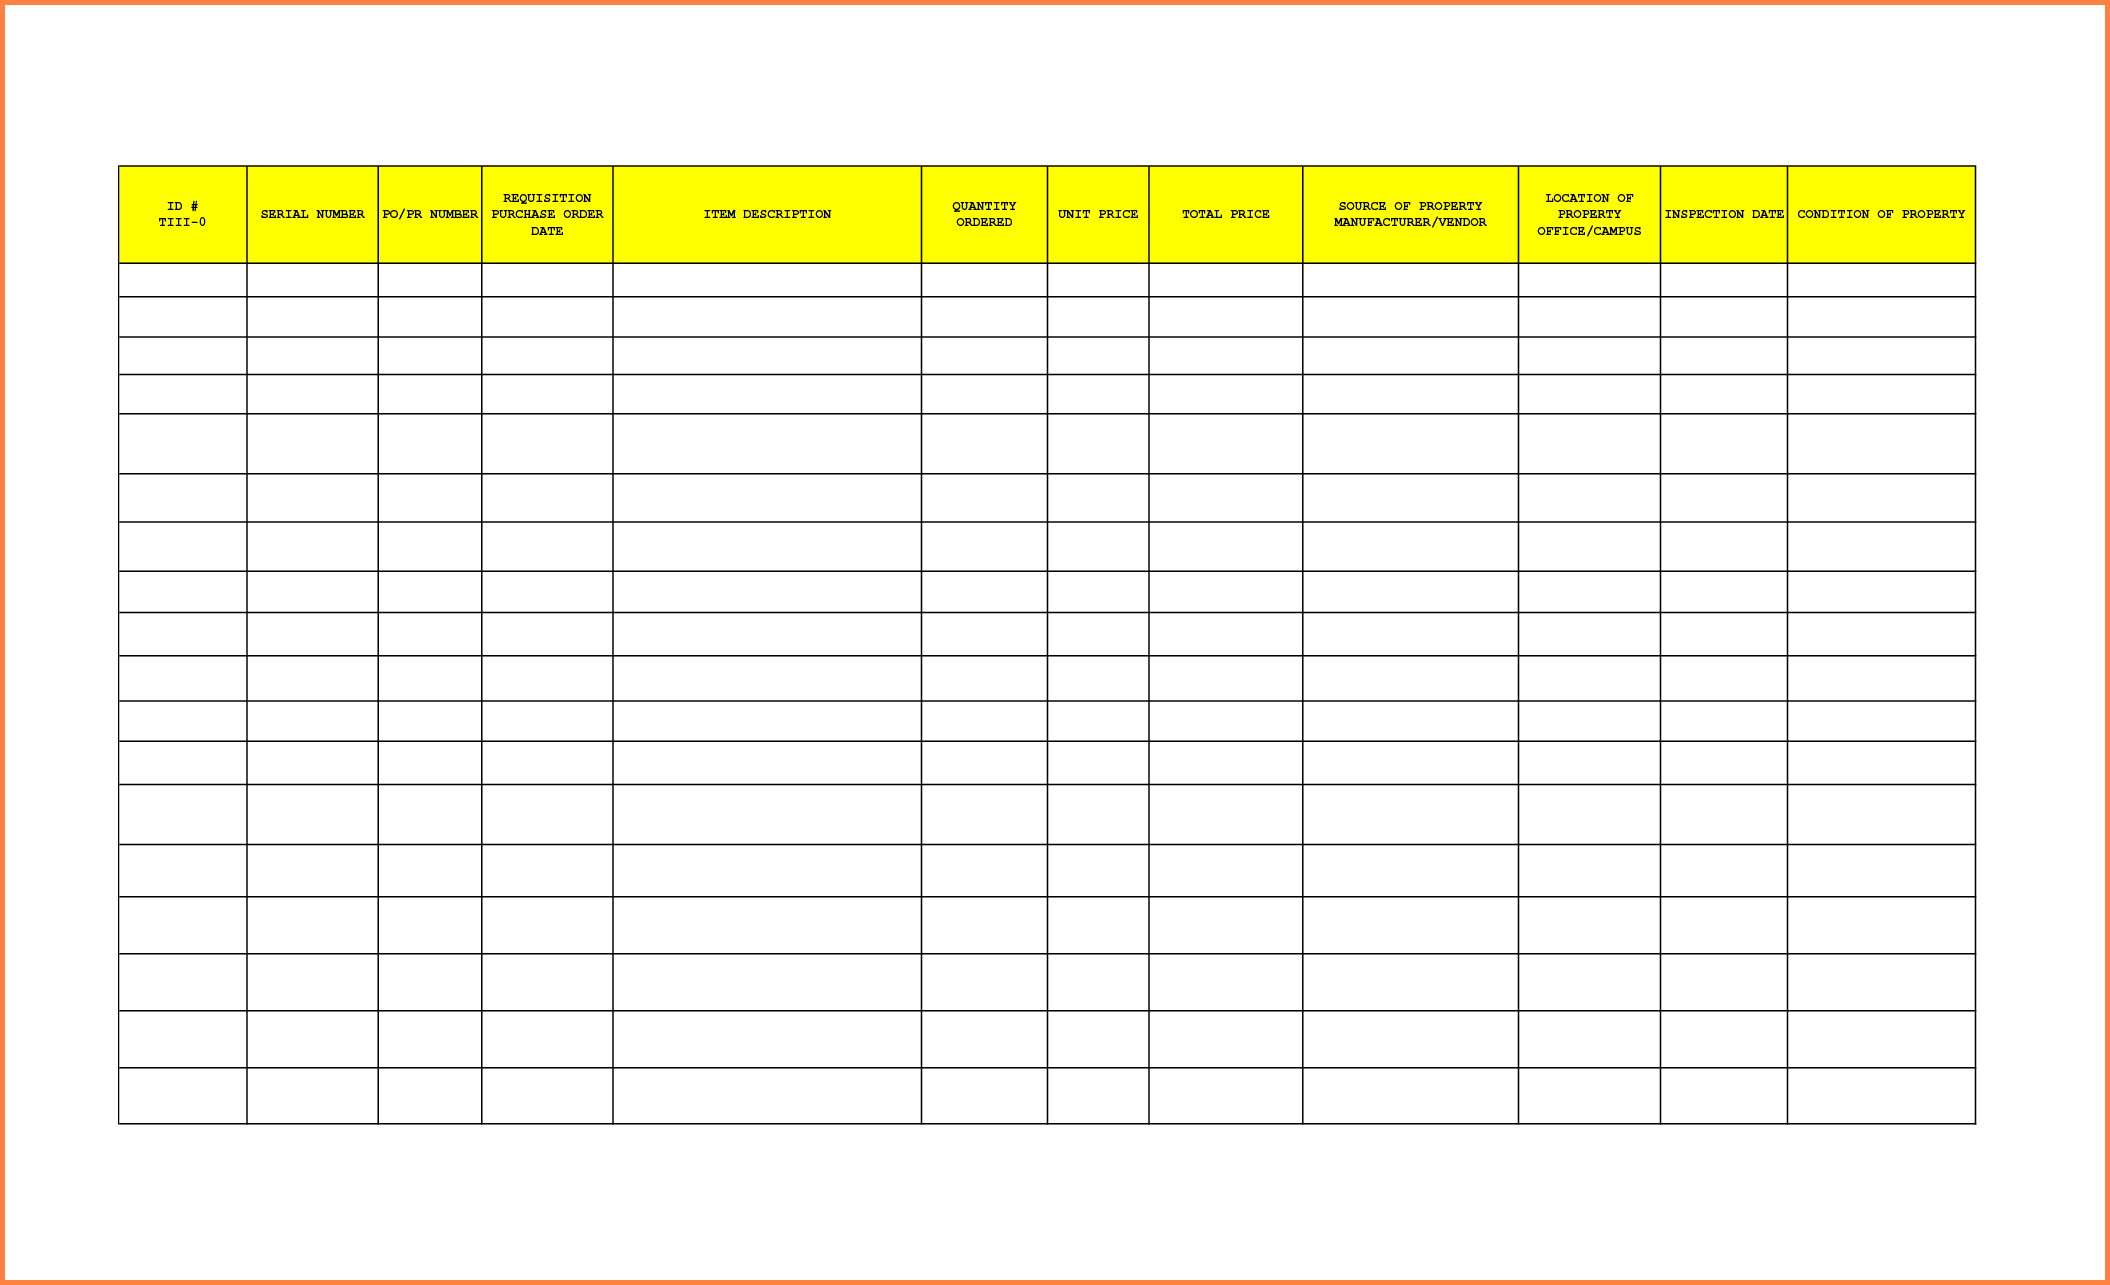 Letter Of Supply Inventory Spreadsheet Template For Supply Inventory Spreadsheet Template Document